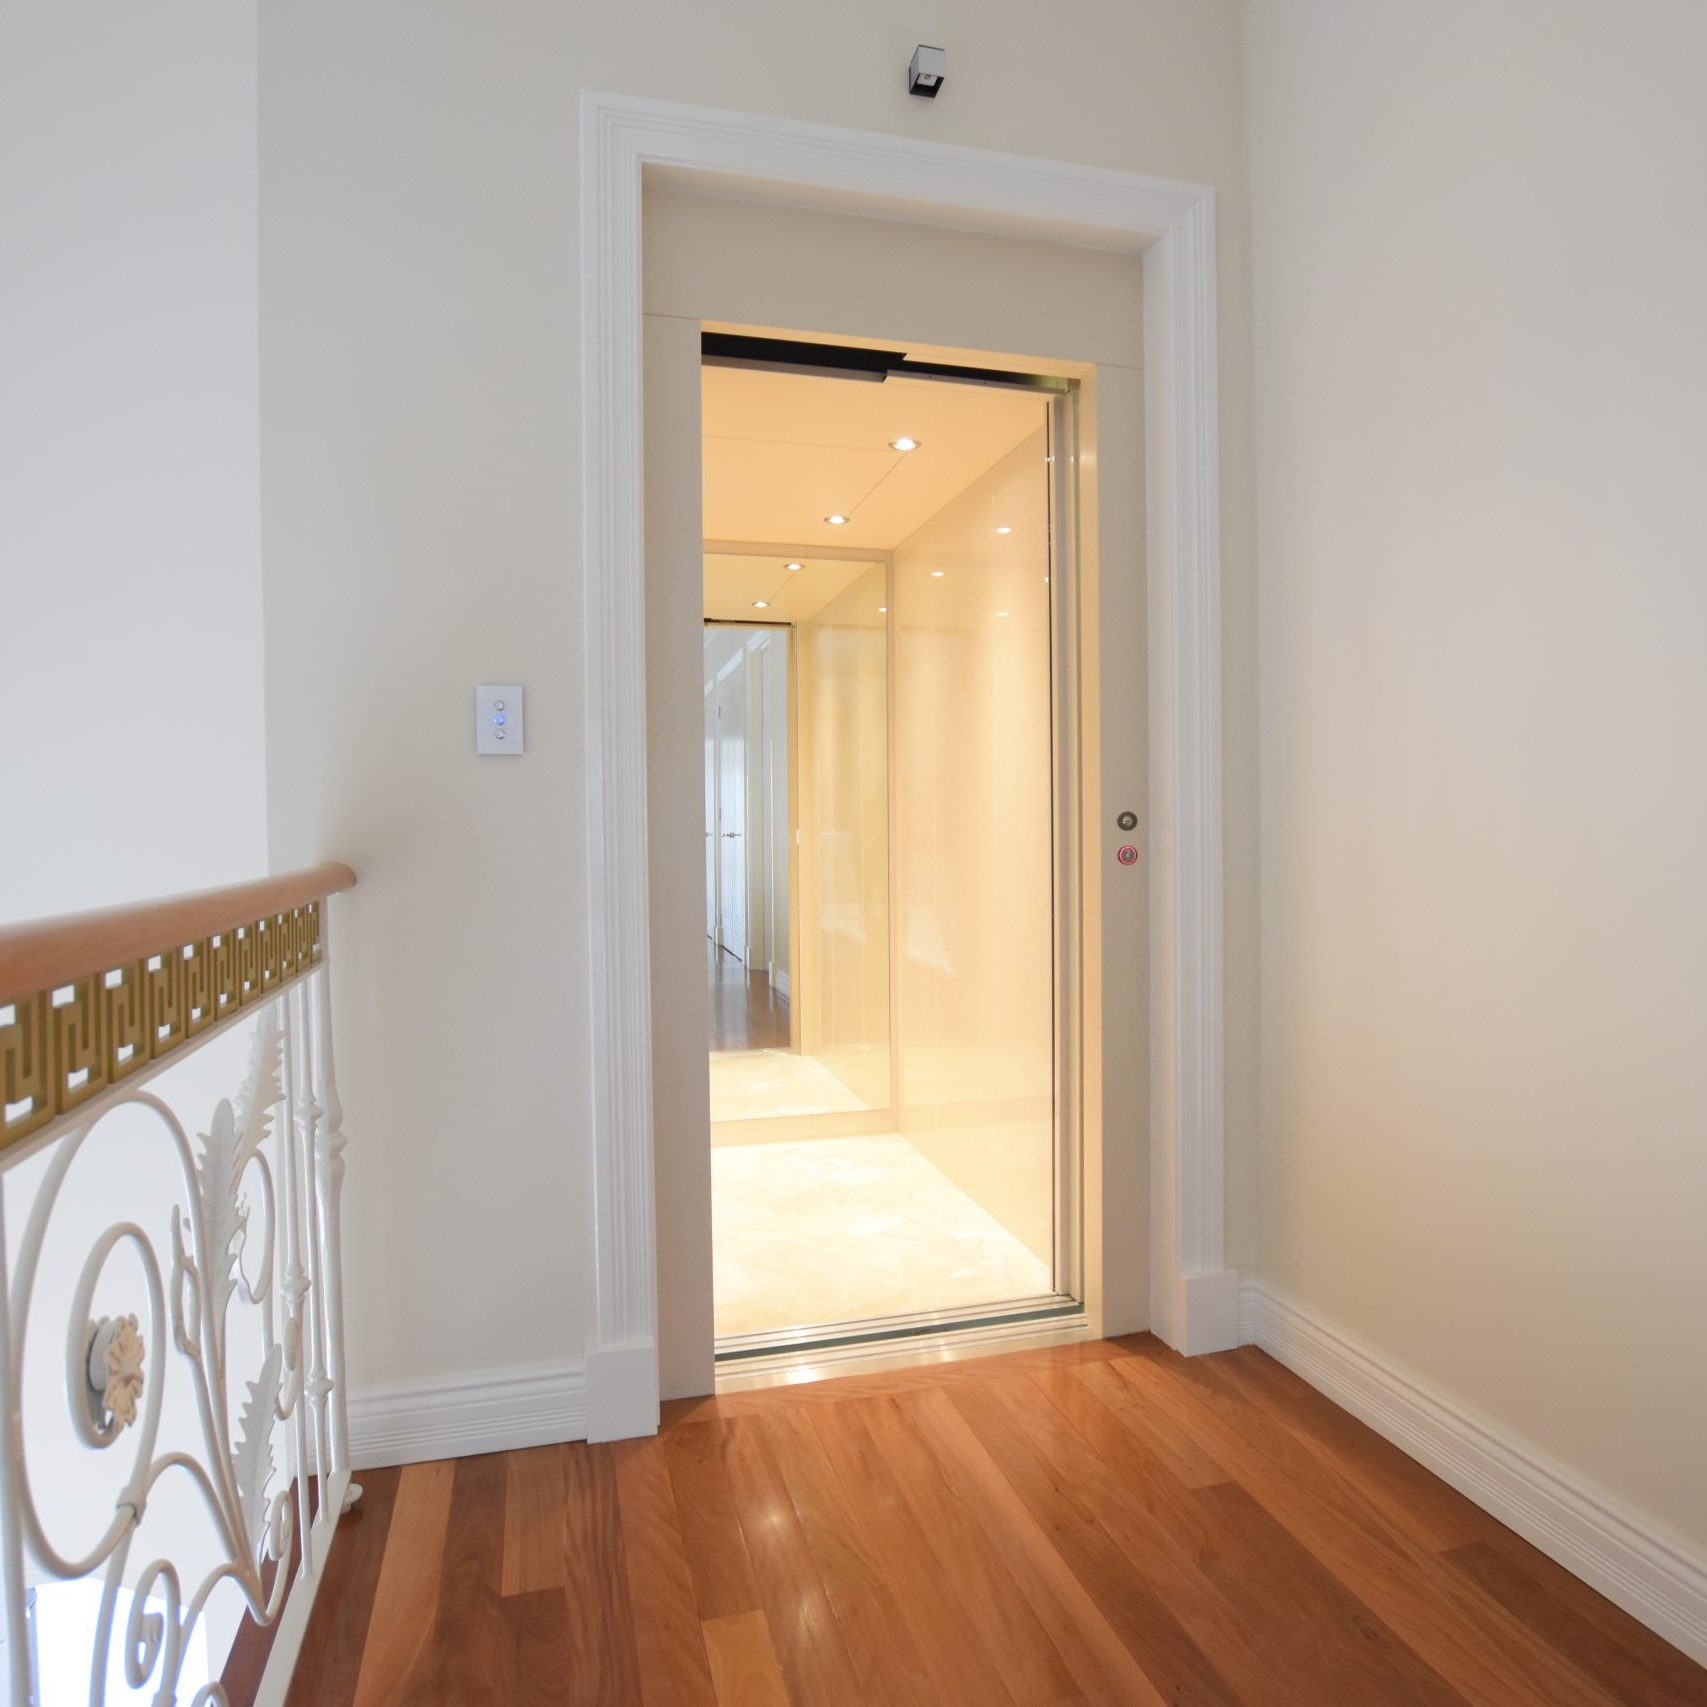 wannanup residential elevator installed